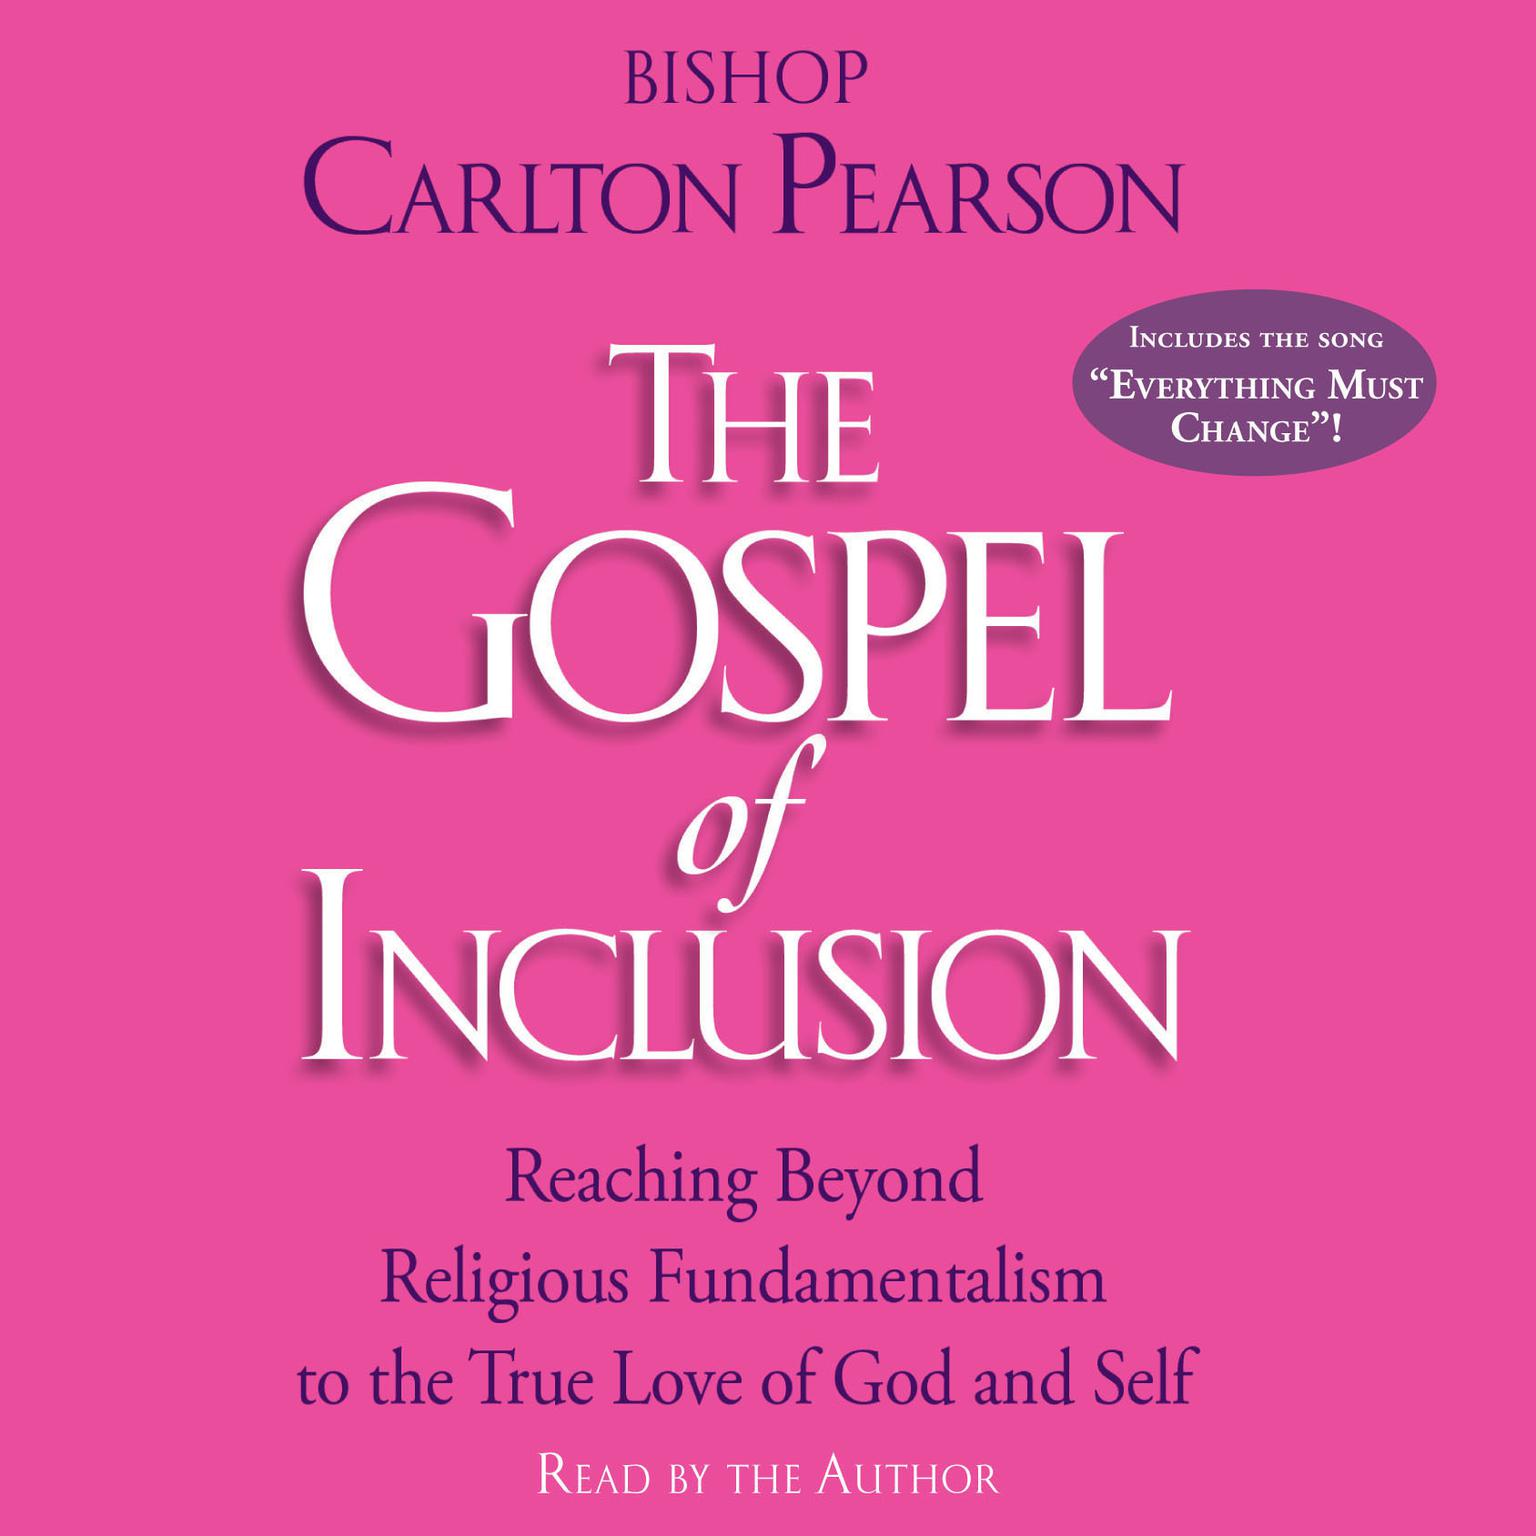 The Gospel of Inclusion (Abridged): Reaching Beyond Religious Fundamentalism to the True Love of God and Self Audiobook, by Carlton Pearson